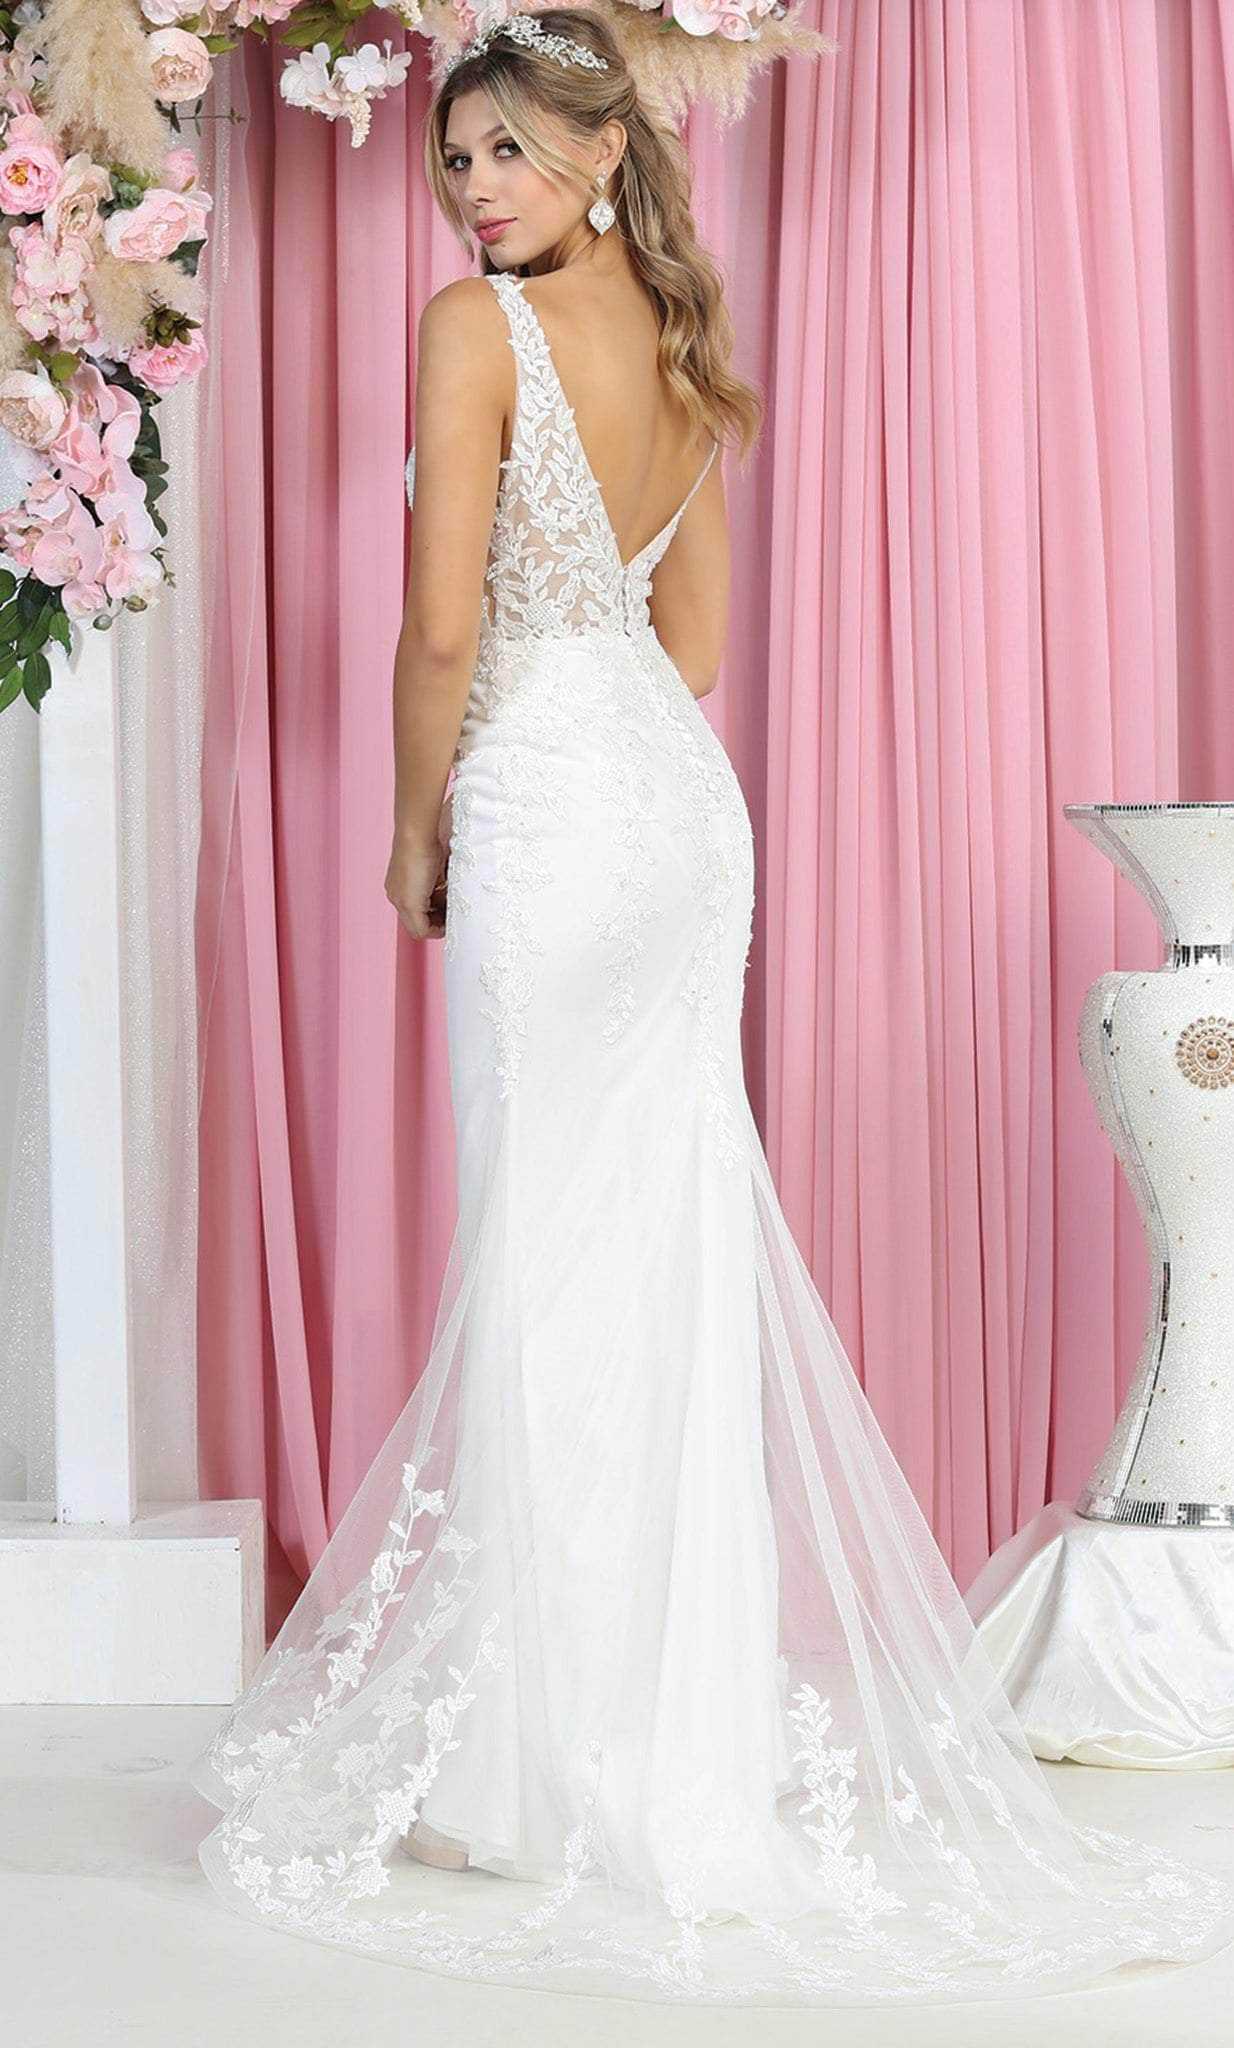 May Queen, May Queen RQ7889 - V Neck and Back Bridal Dress